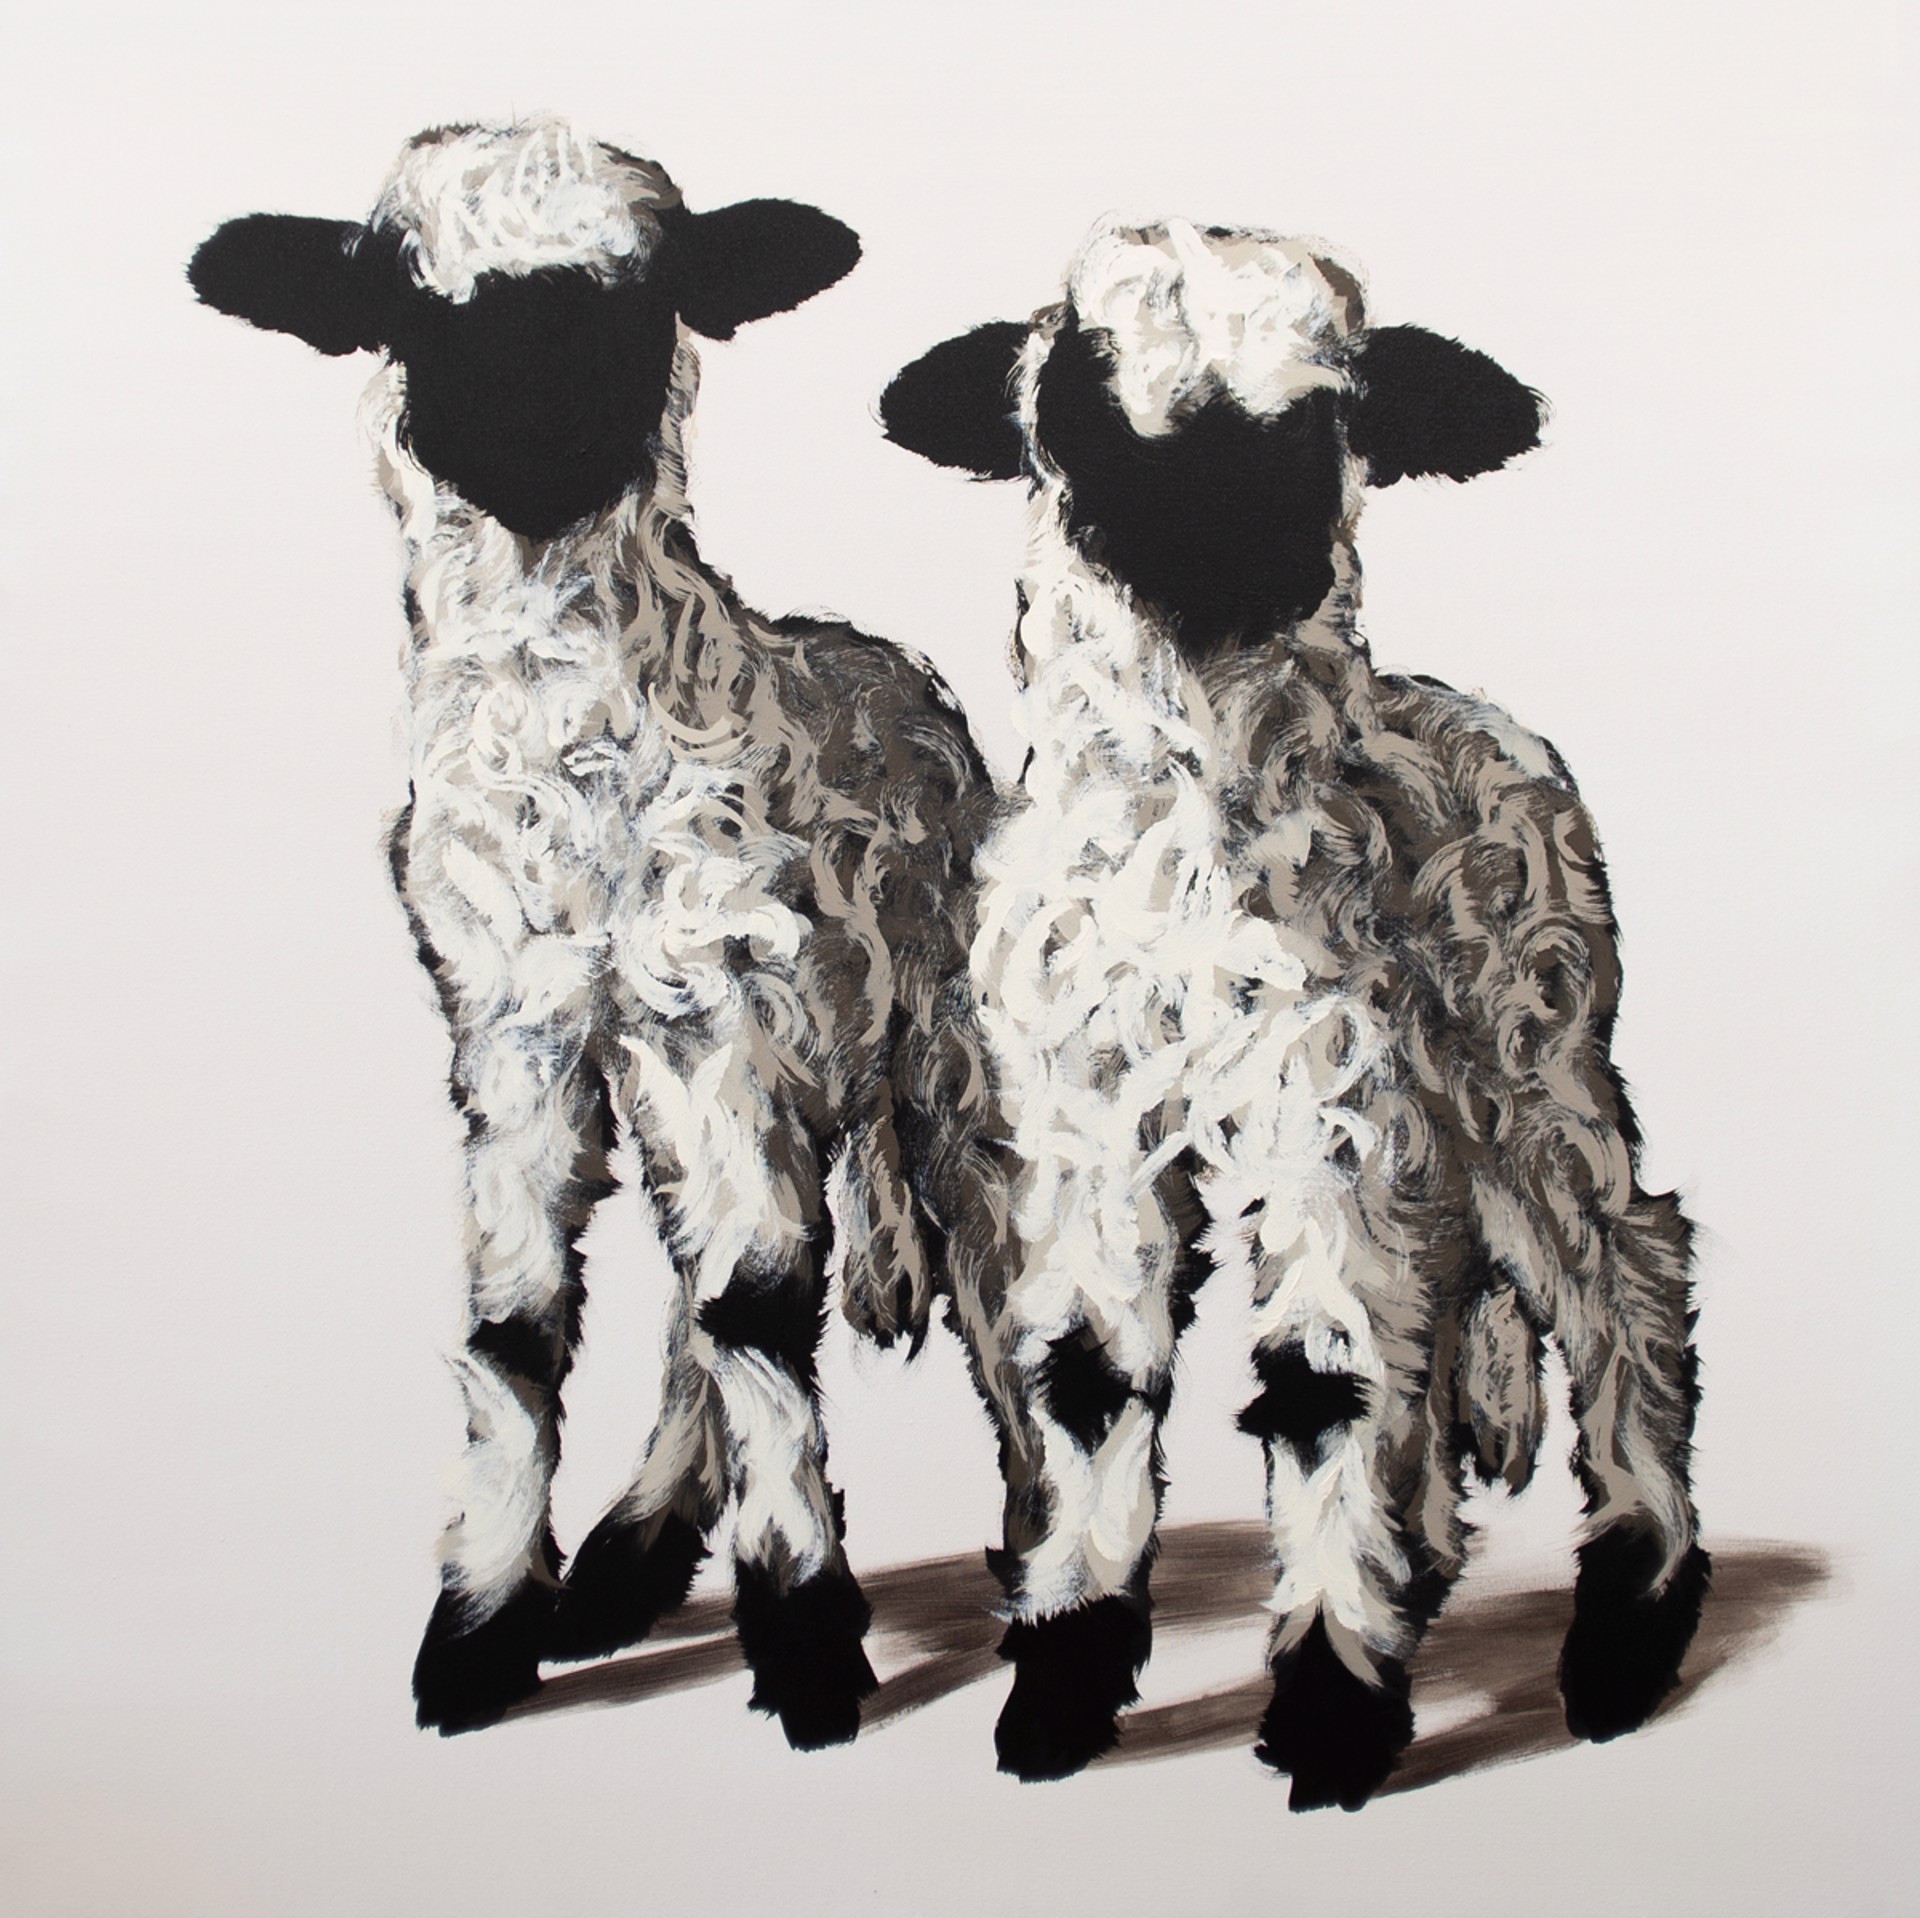 Two Lambs on White by Josh Brown